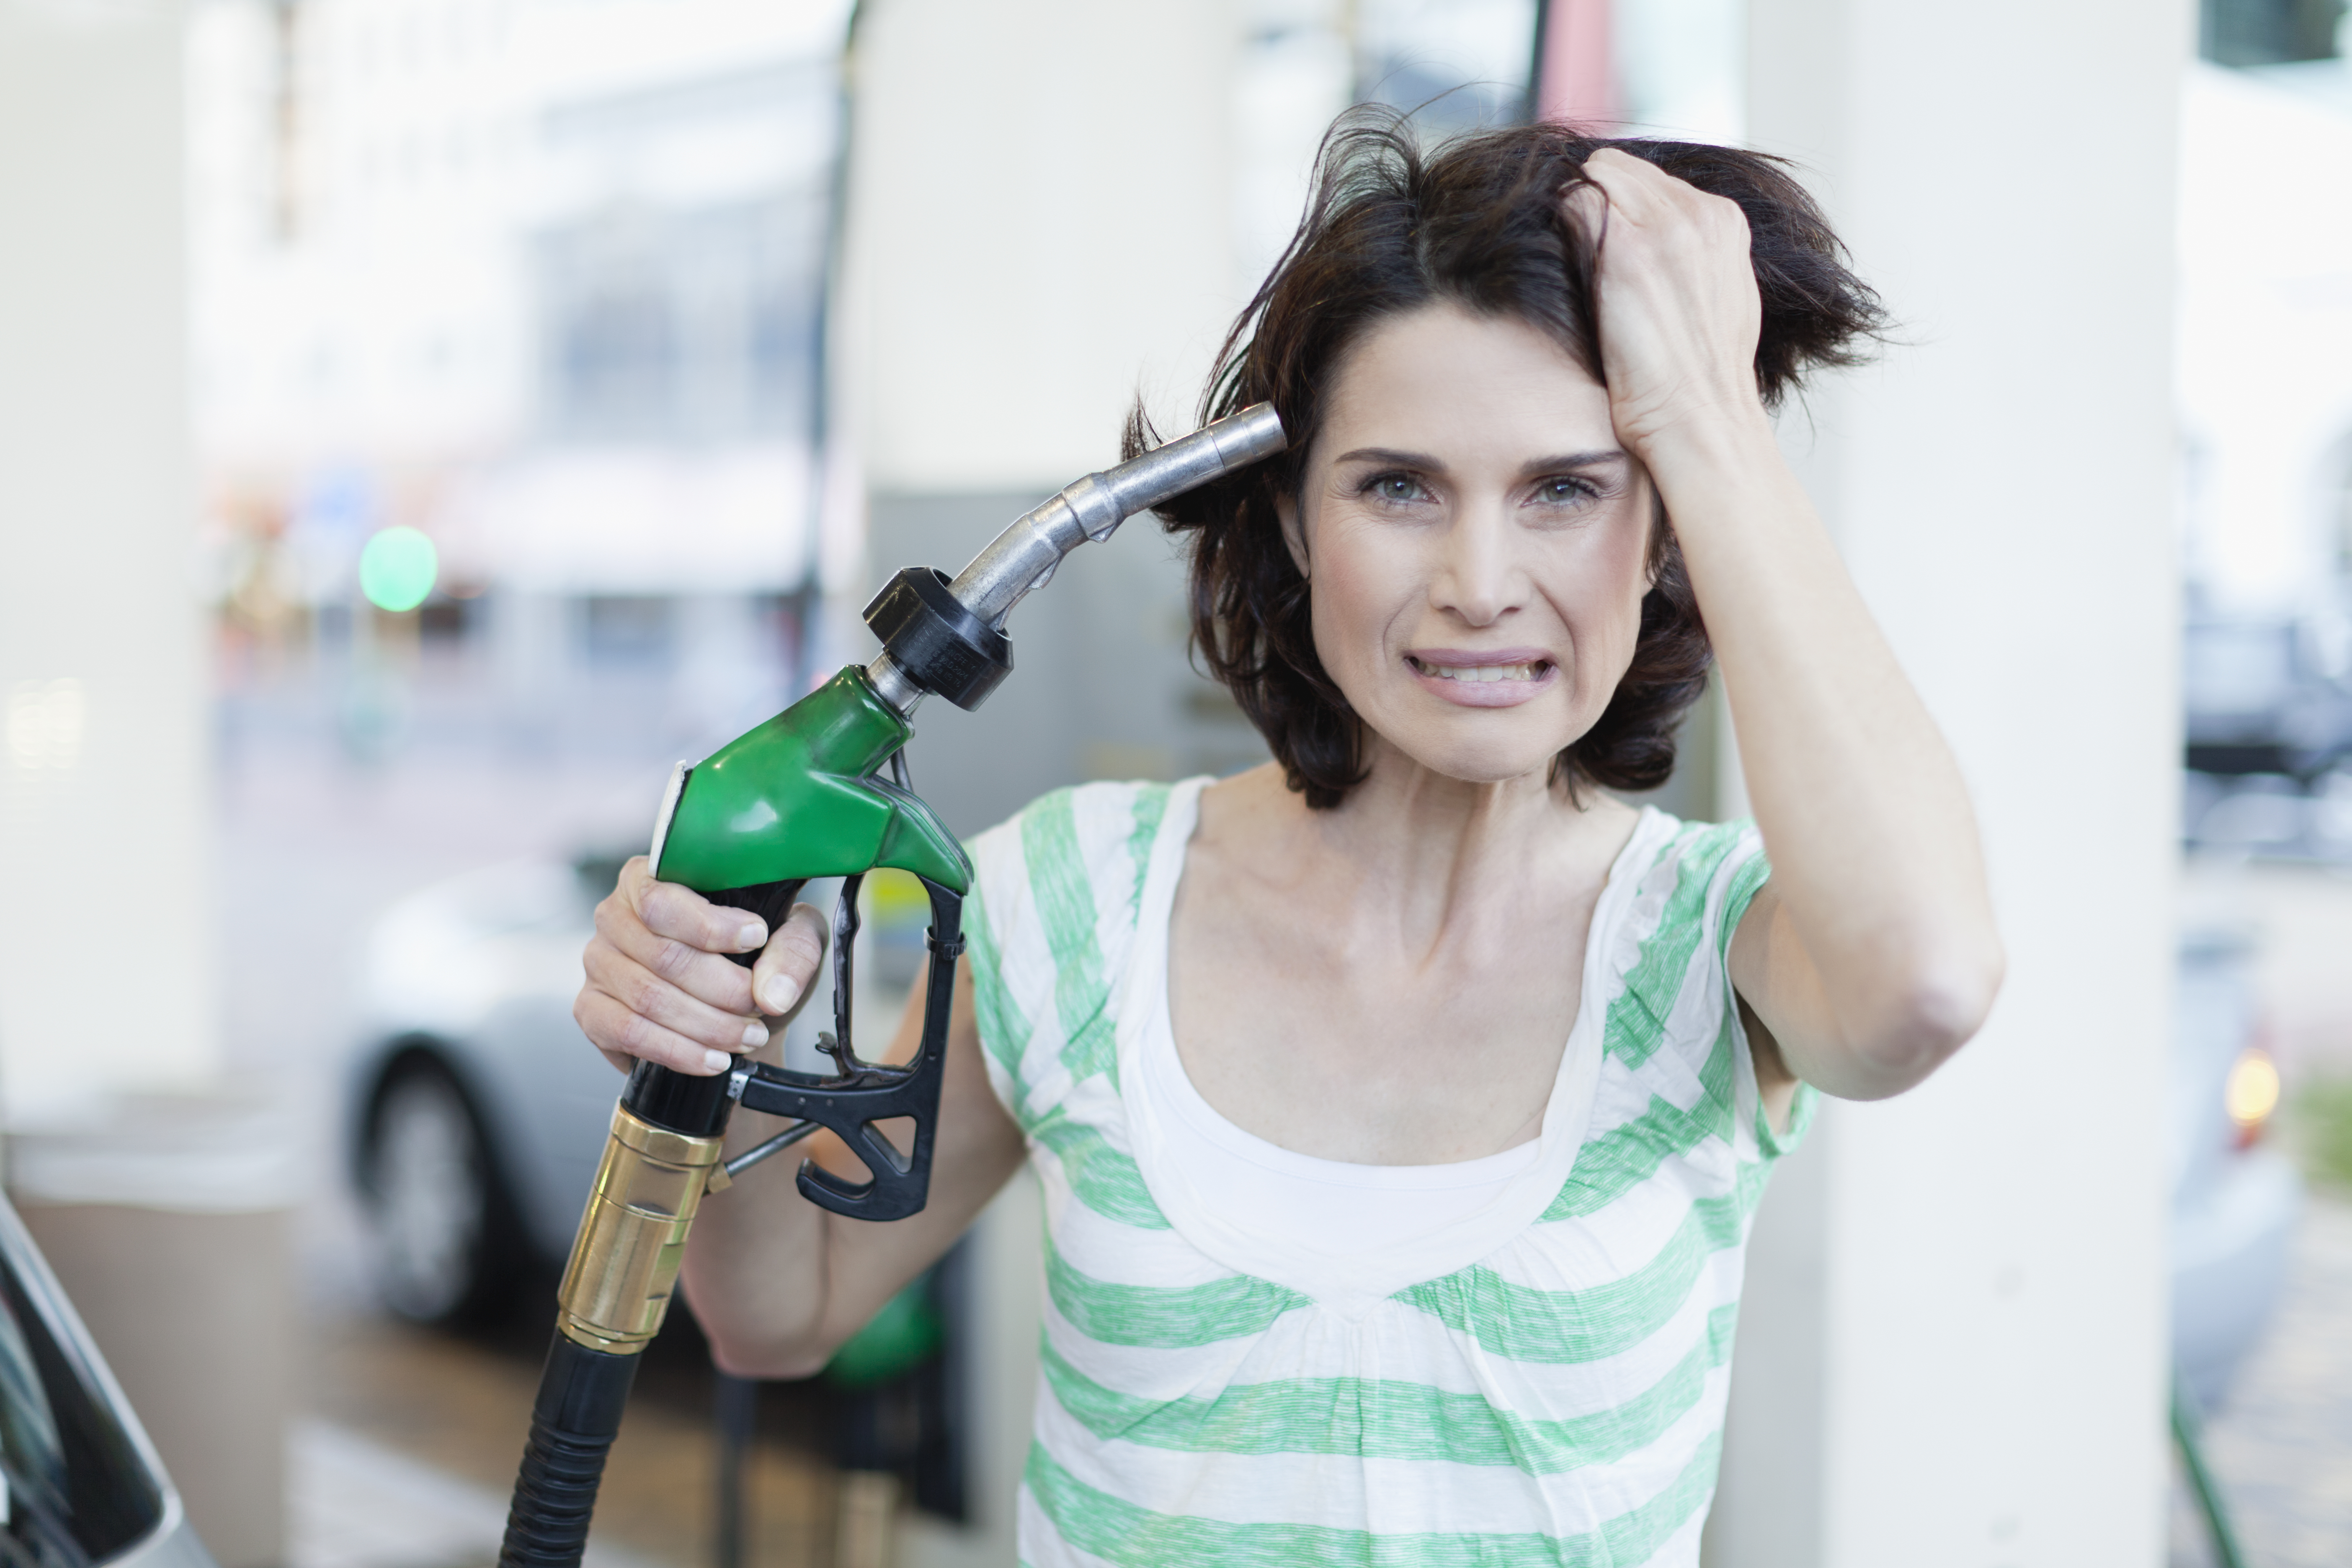 Not pumped at the pump [Hybrid Images via Getty Images]